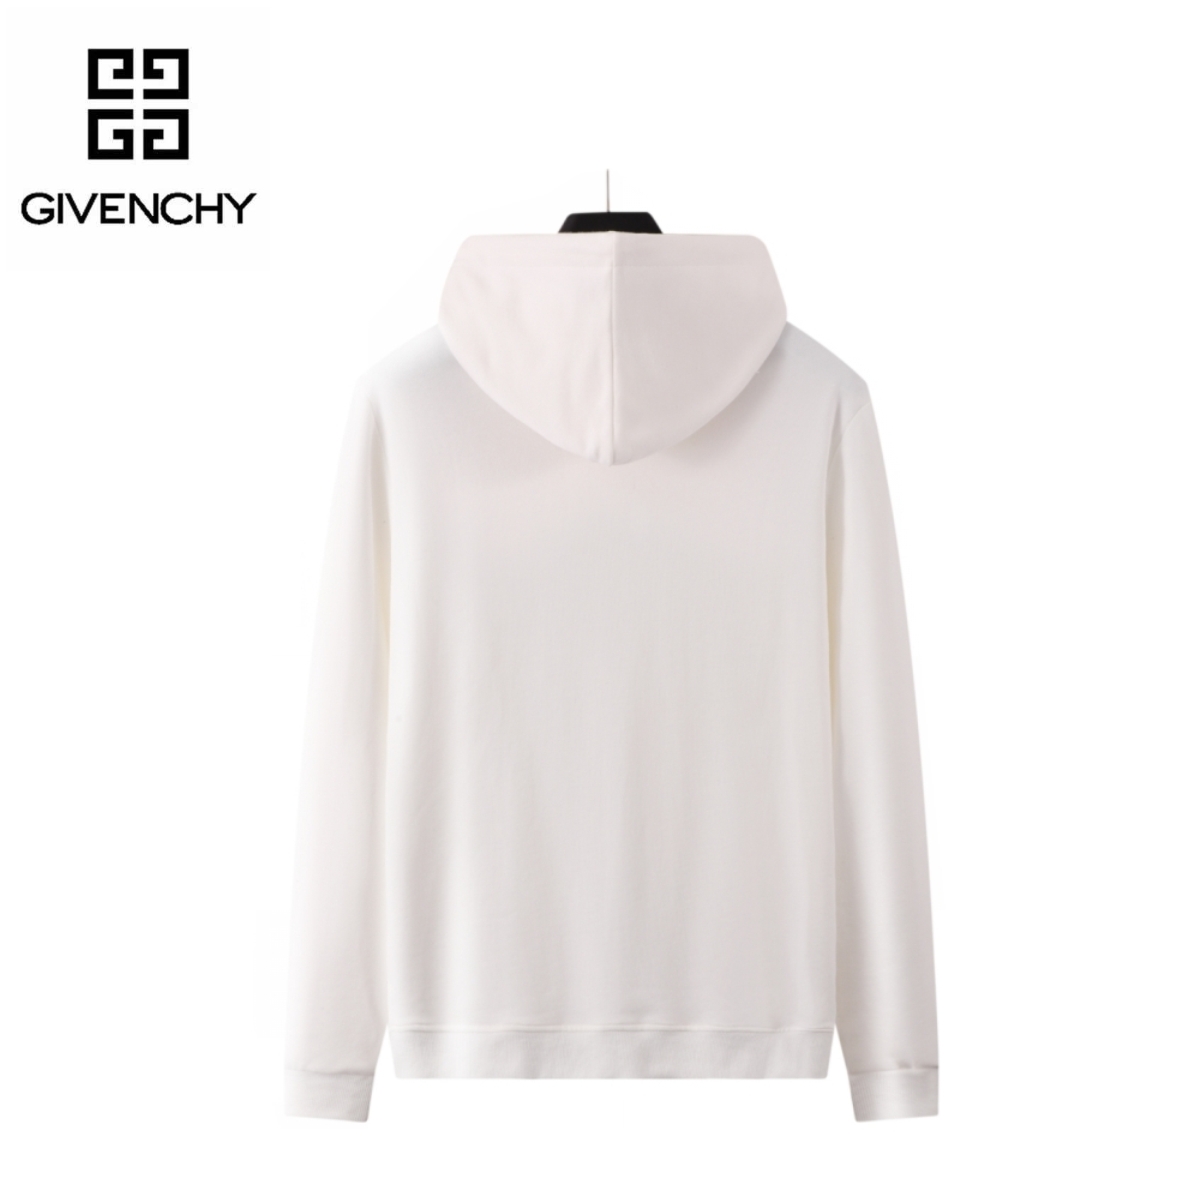 Givenchy Hoodies Unisex # 263772, cheap Givenchy Hoodies, only $42!